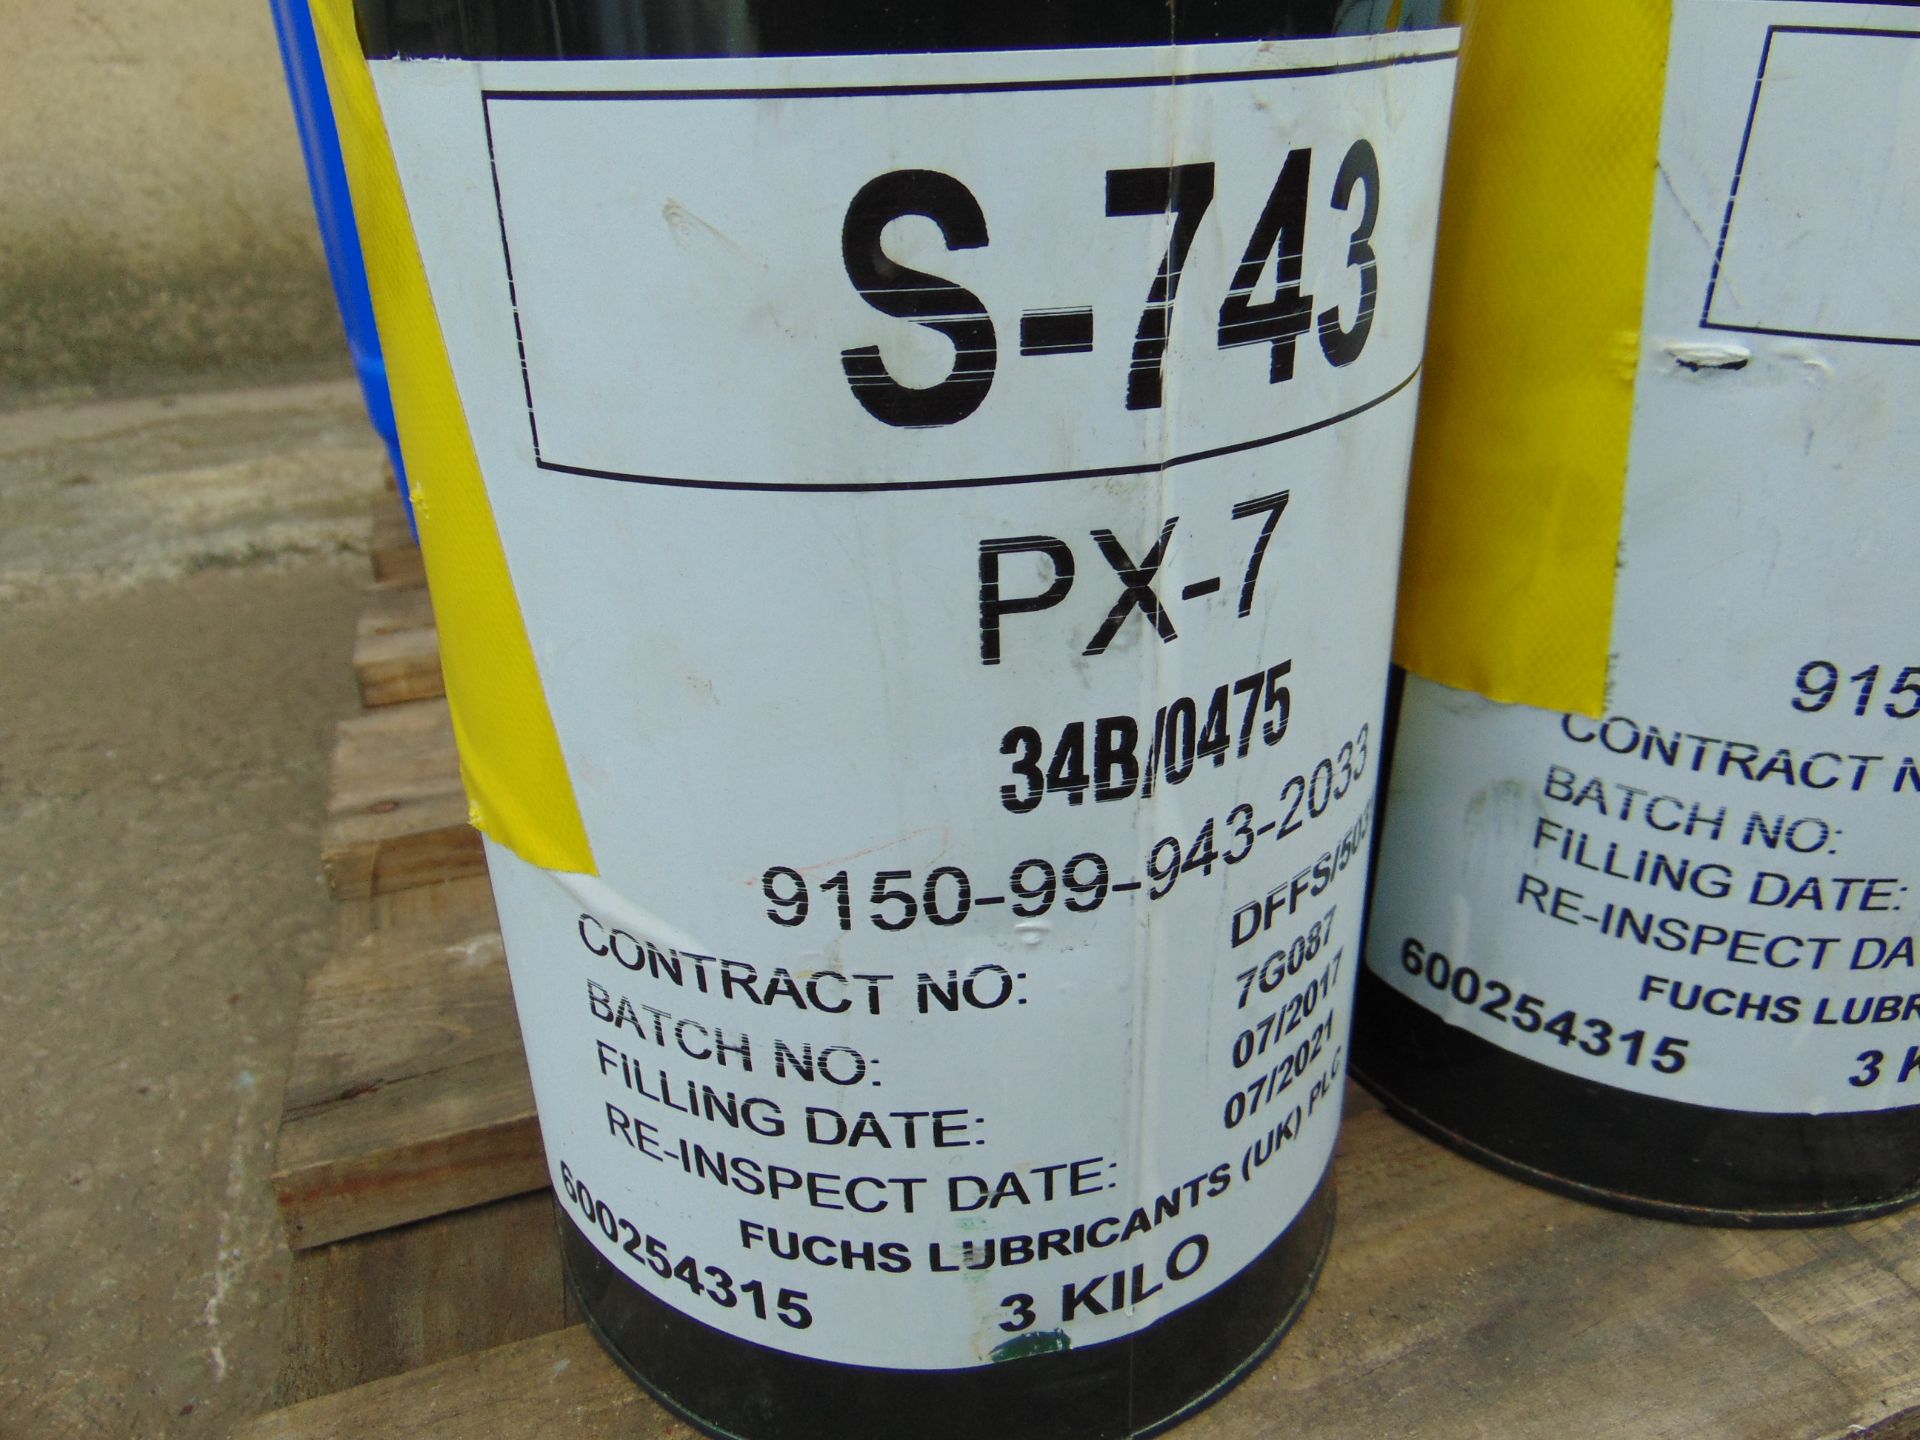 2x Unissued 3Kg Drums of PX-7 Lubricating Grease - Image 2 of 2